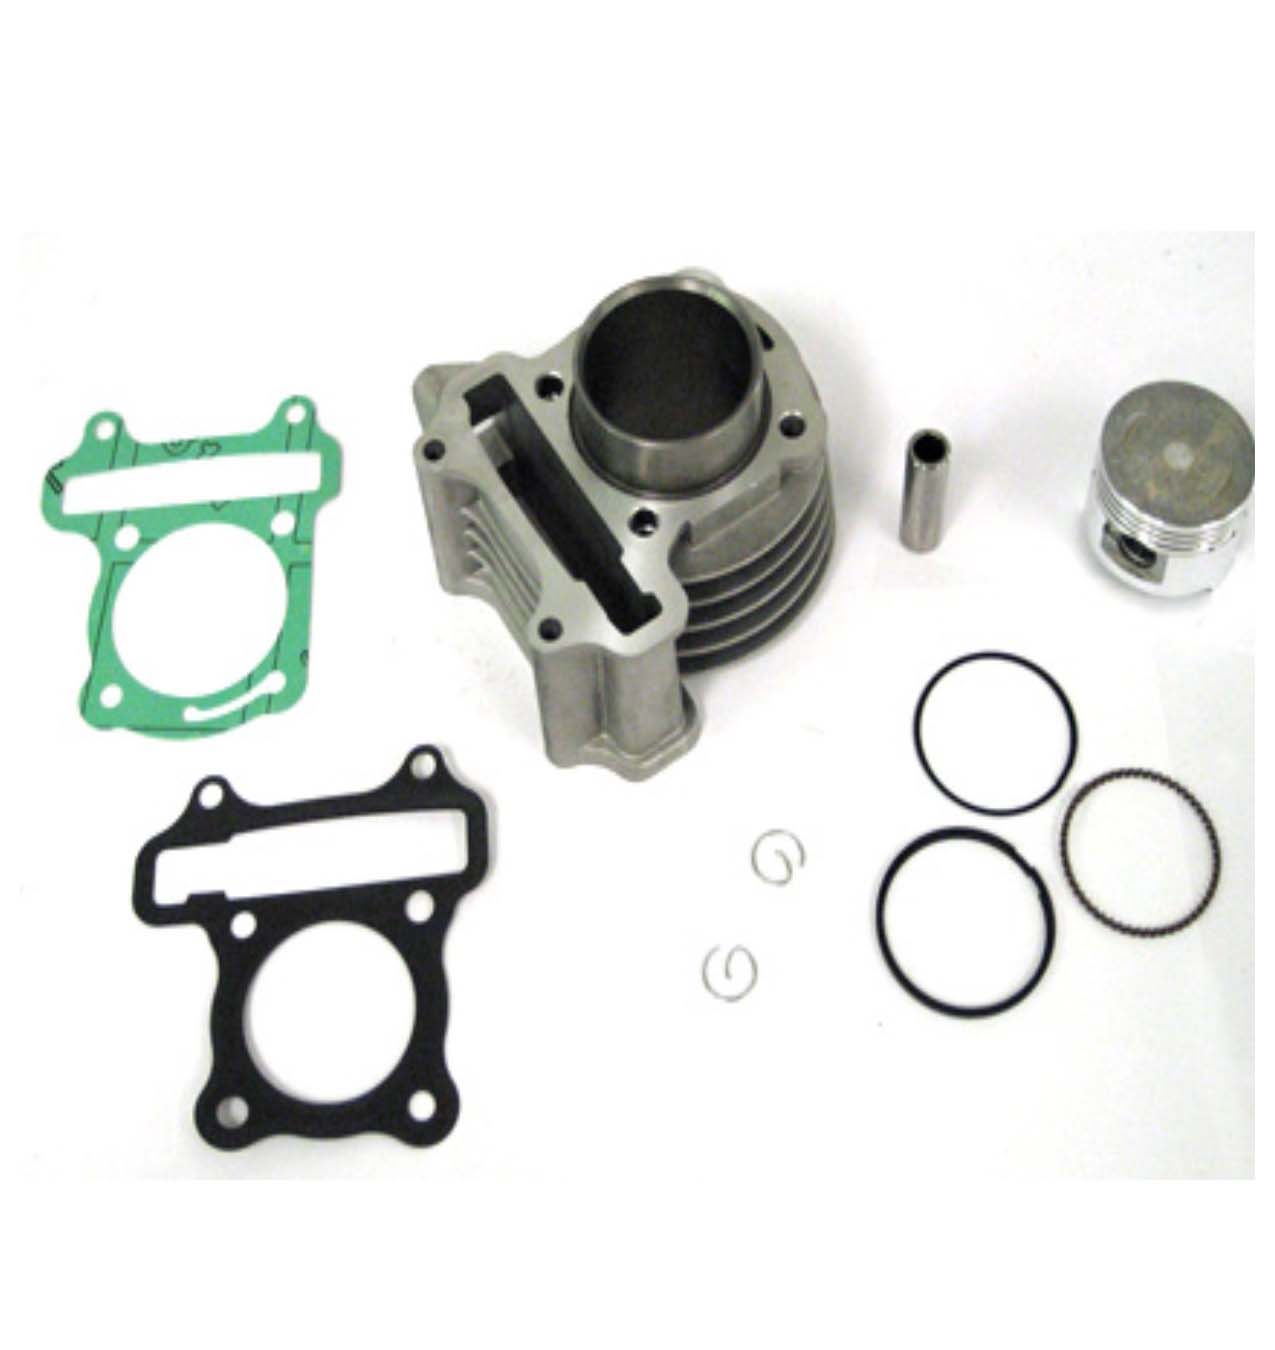 49cc (Standard) Cylinder Piston Top End Kit For GY6-50 QMB139 Chinese Scooter Motors. Bore=39mm